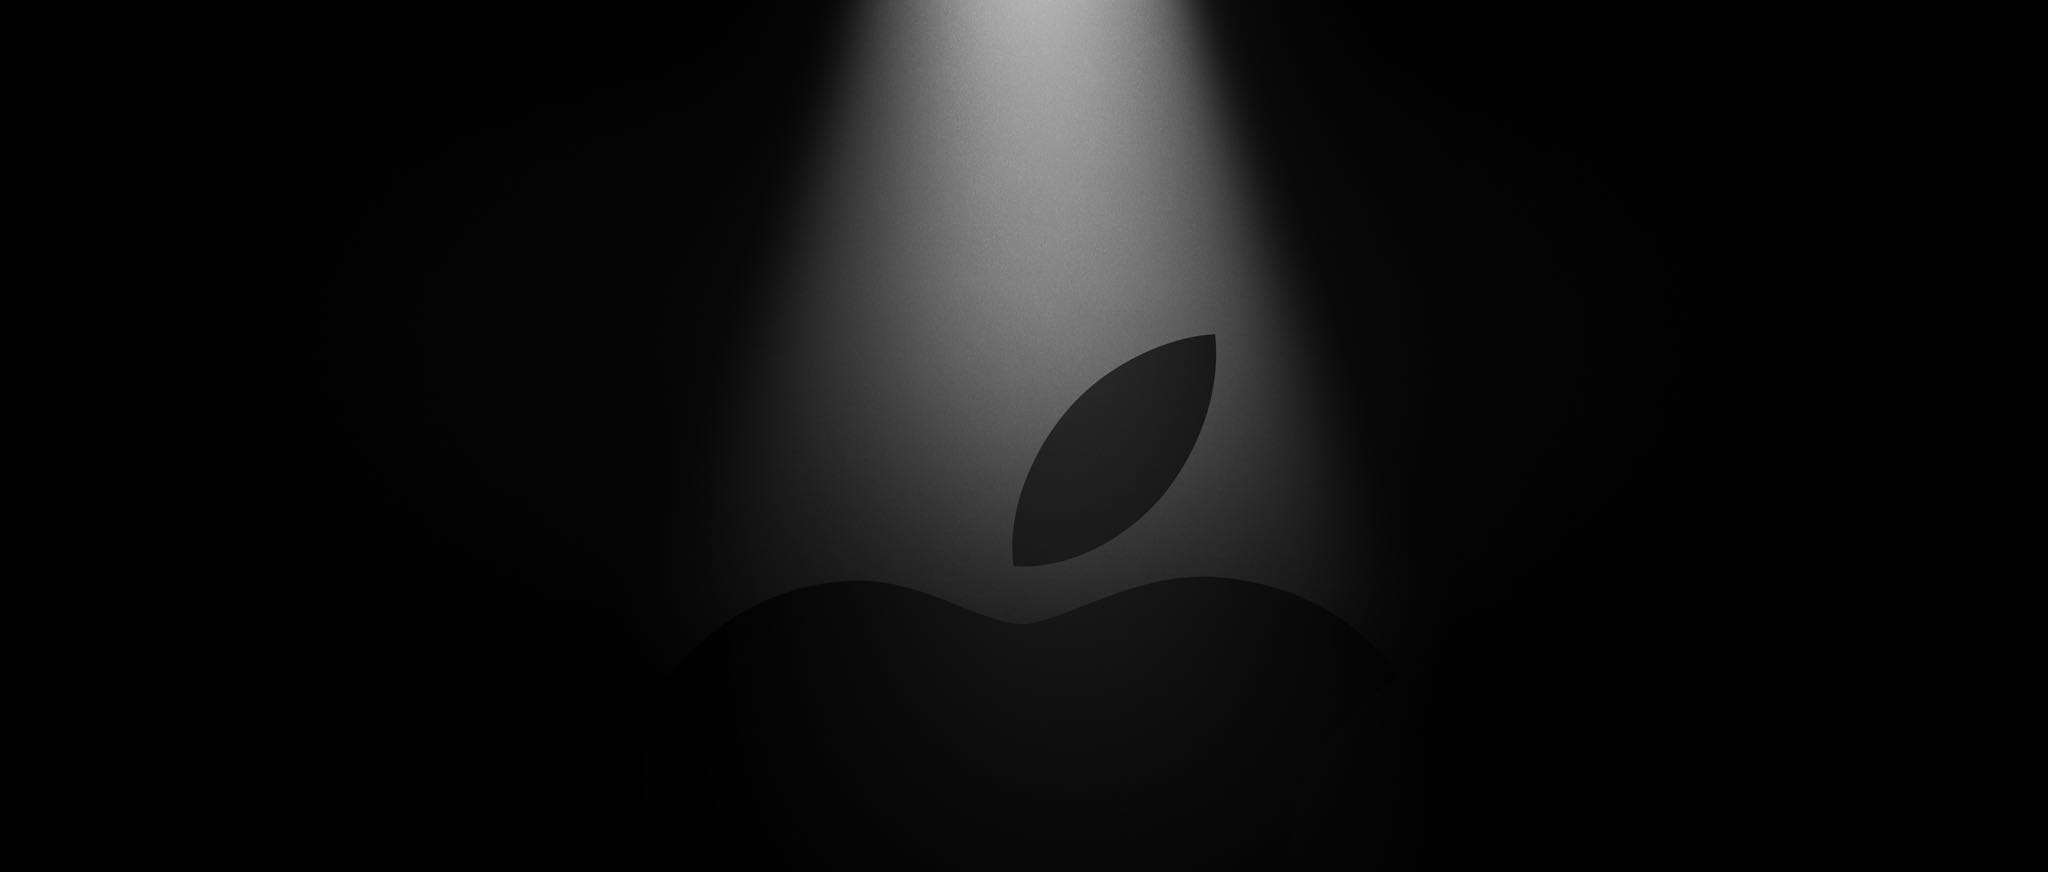 A teaser image showing the upper half of a black Apple logo, set against a dark background with a bright spotlight above